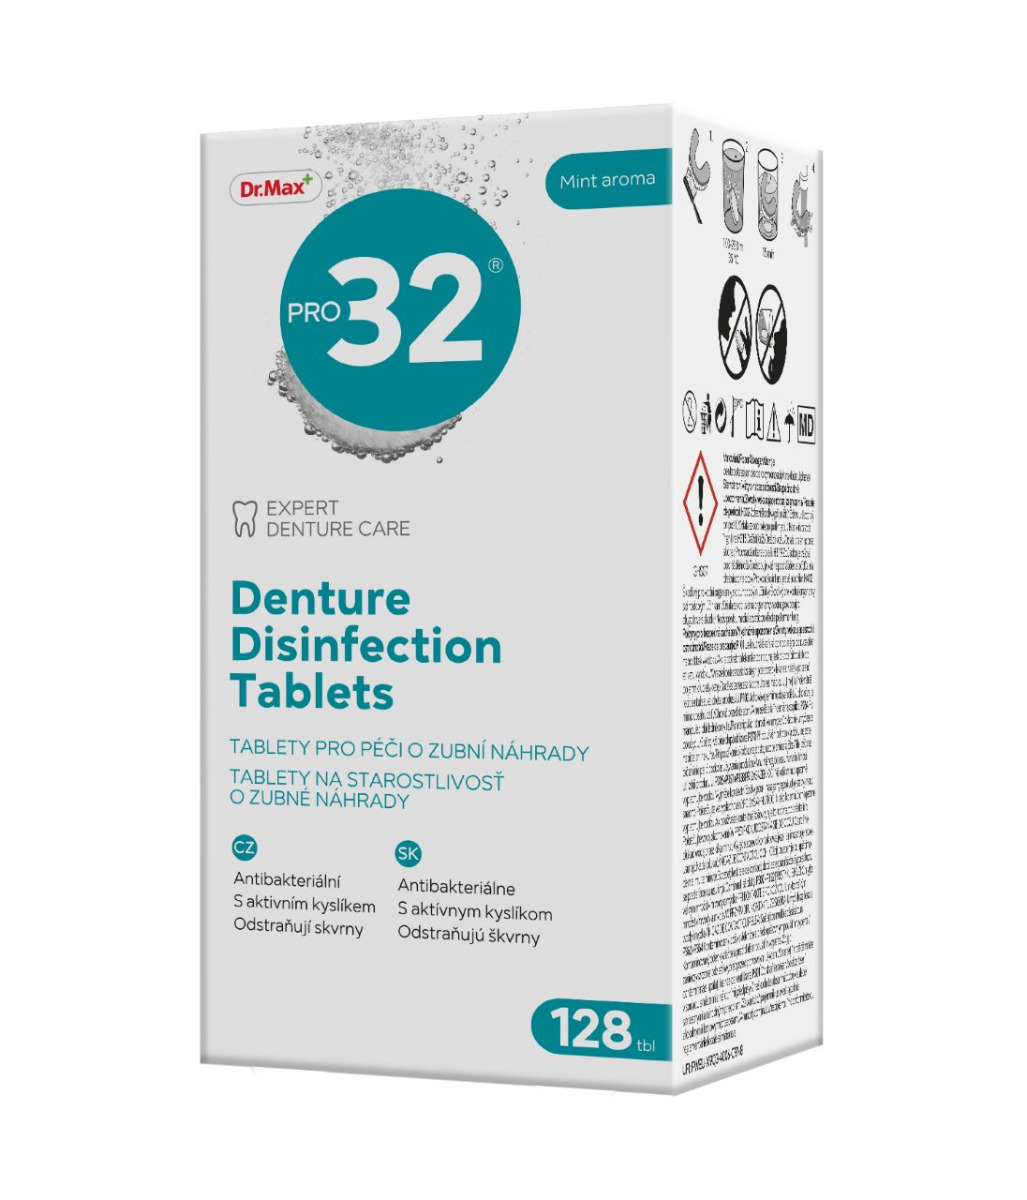 Dr.Max PRO32 Denture Disinfection Tablets 128 tablet Dr.Max